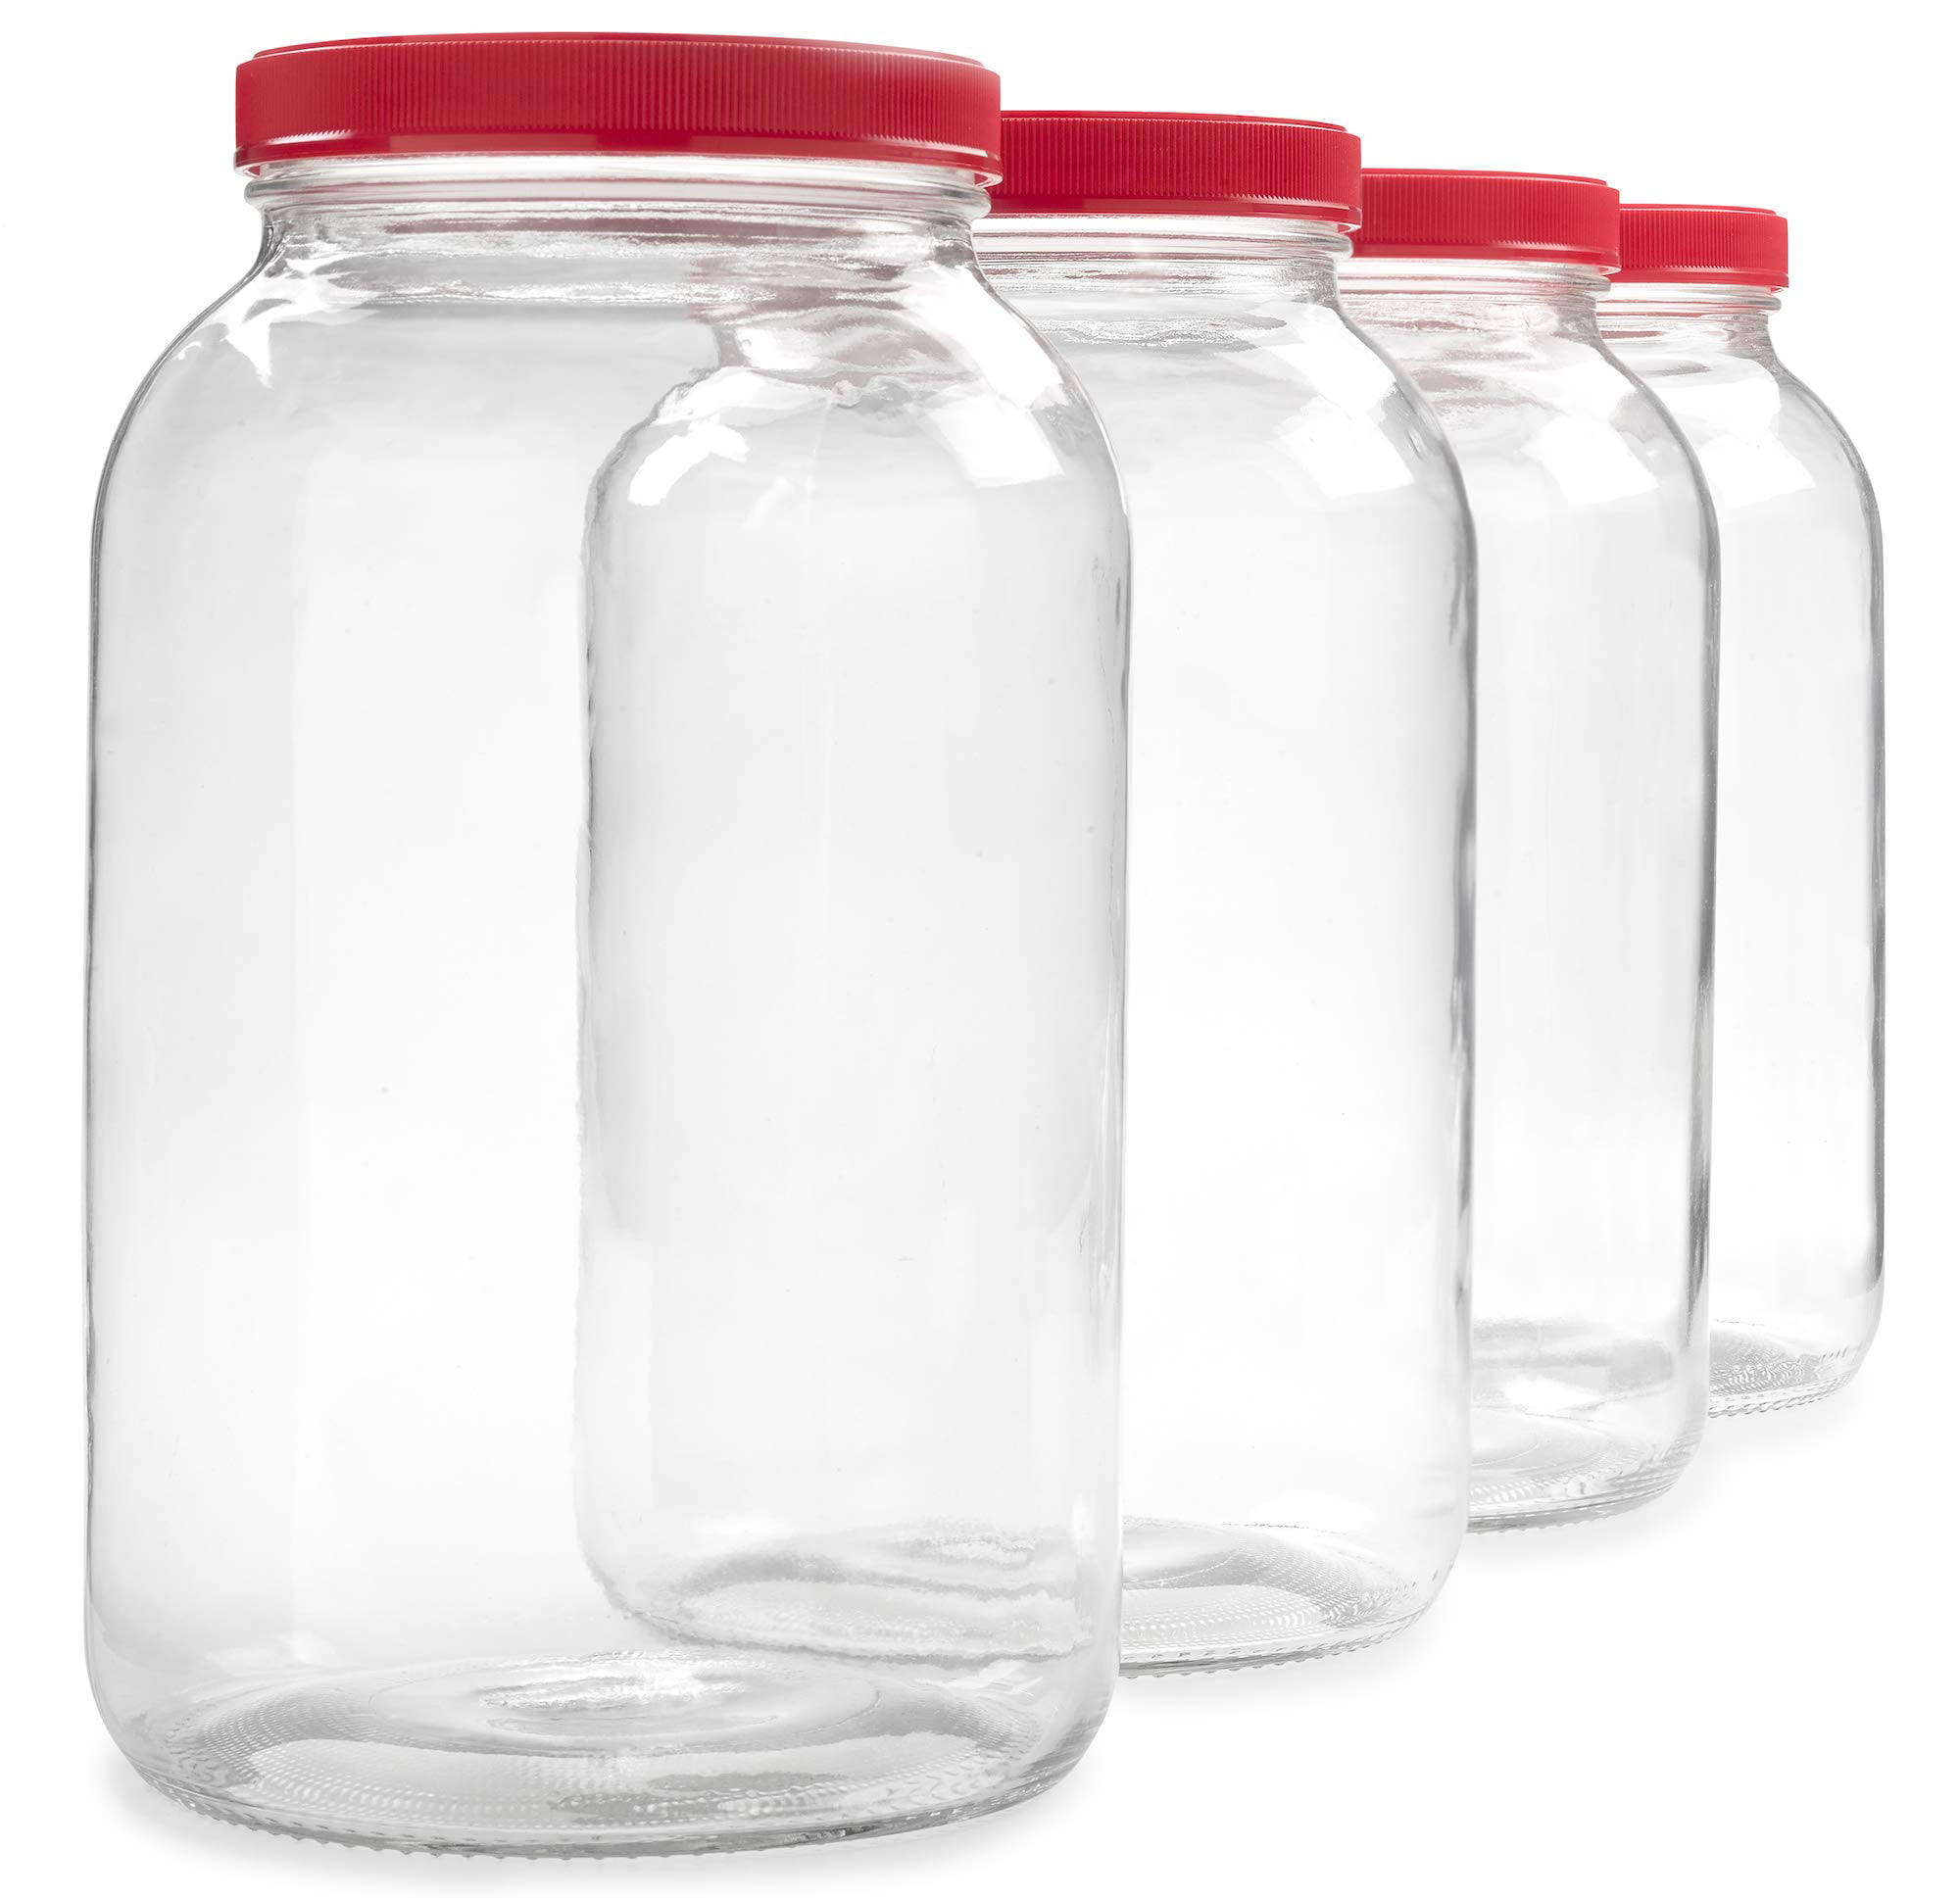 Vibz Wide Mouth Mason Jars with Lids, Food Storage Gallon Glass Jars for  Kombucha, Tea, Canning & More, 4 Pack 